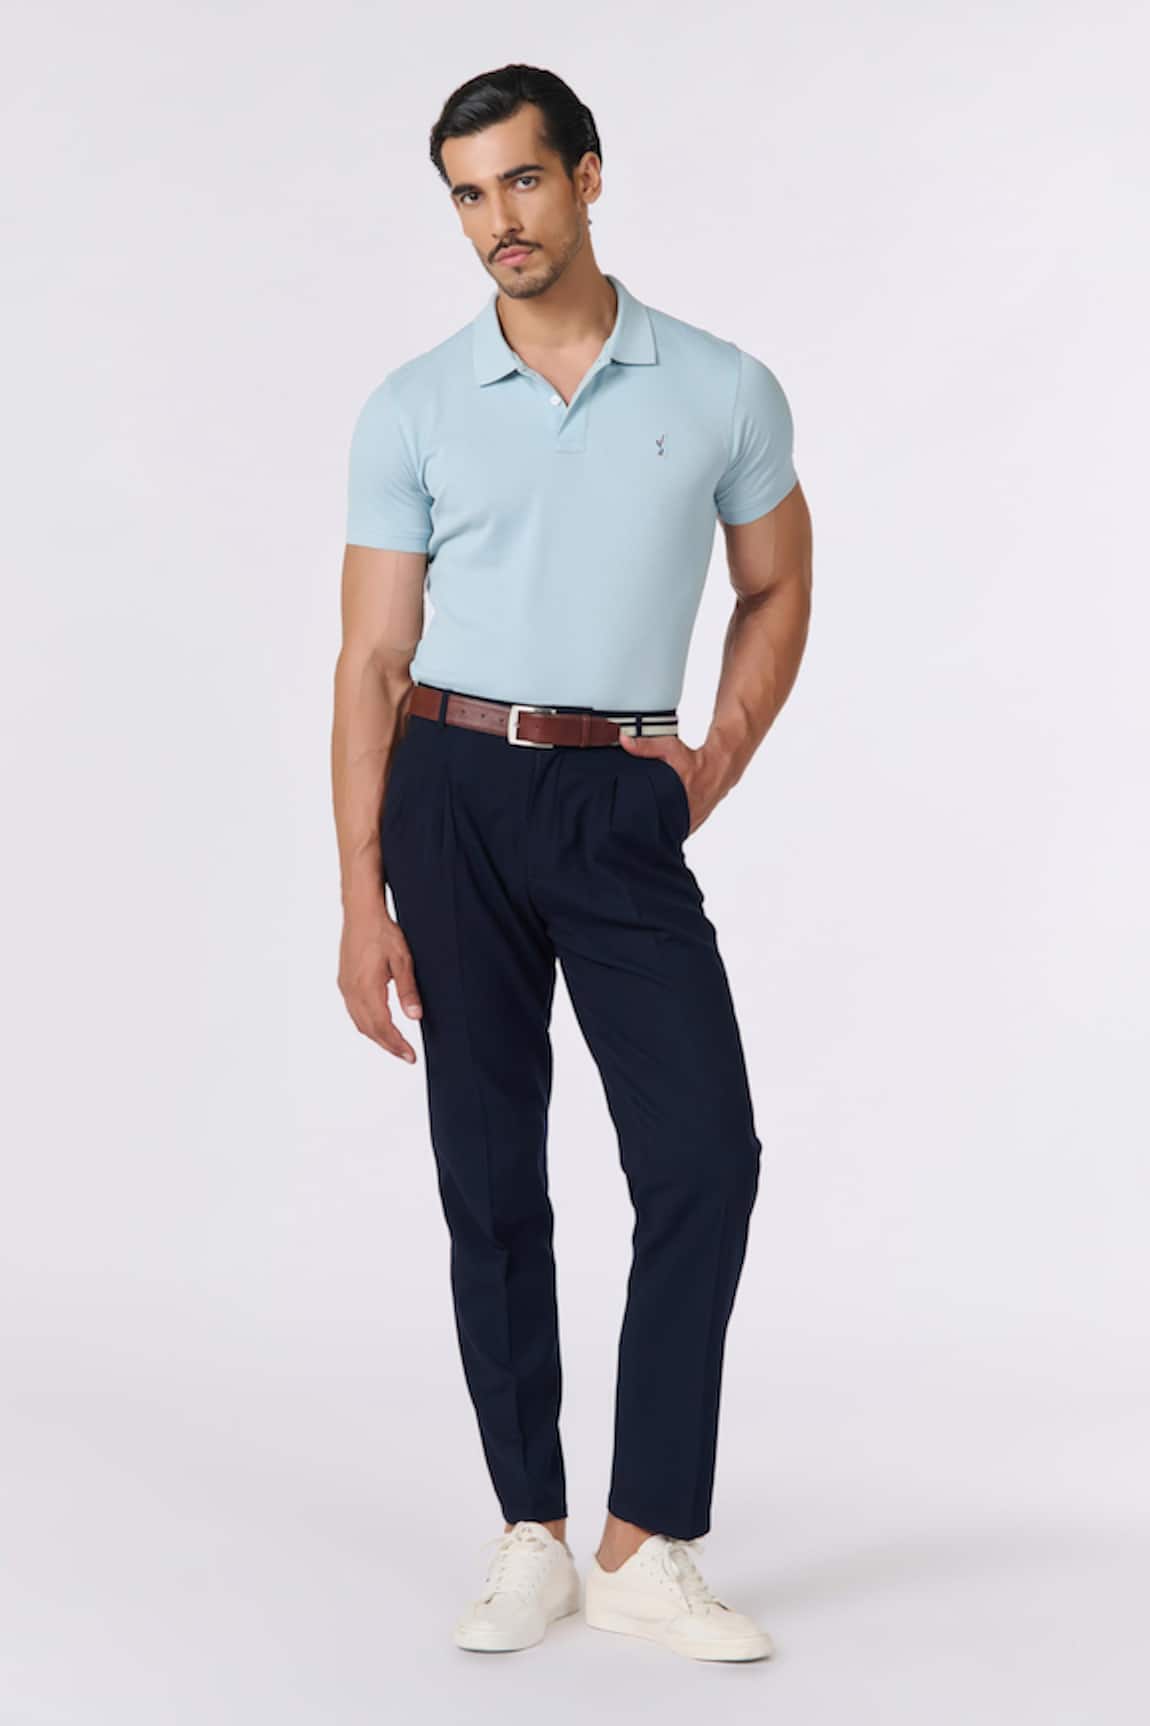 S&N by Shantnu Nikhil Solid Collared Polo T-Shirt